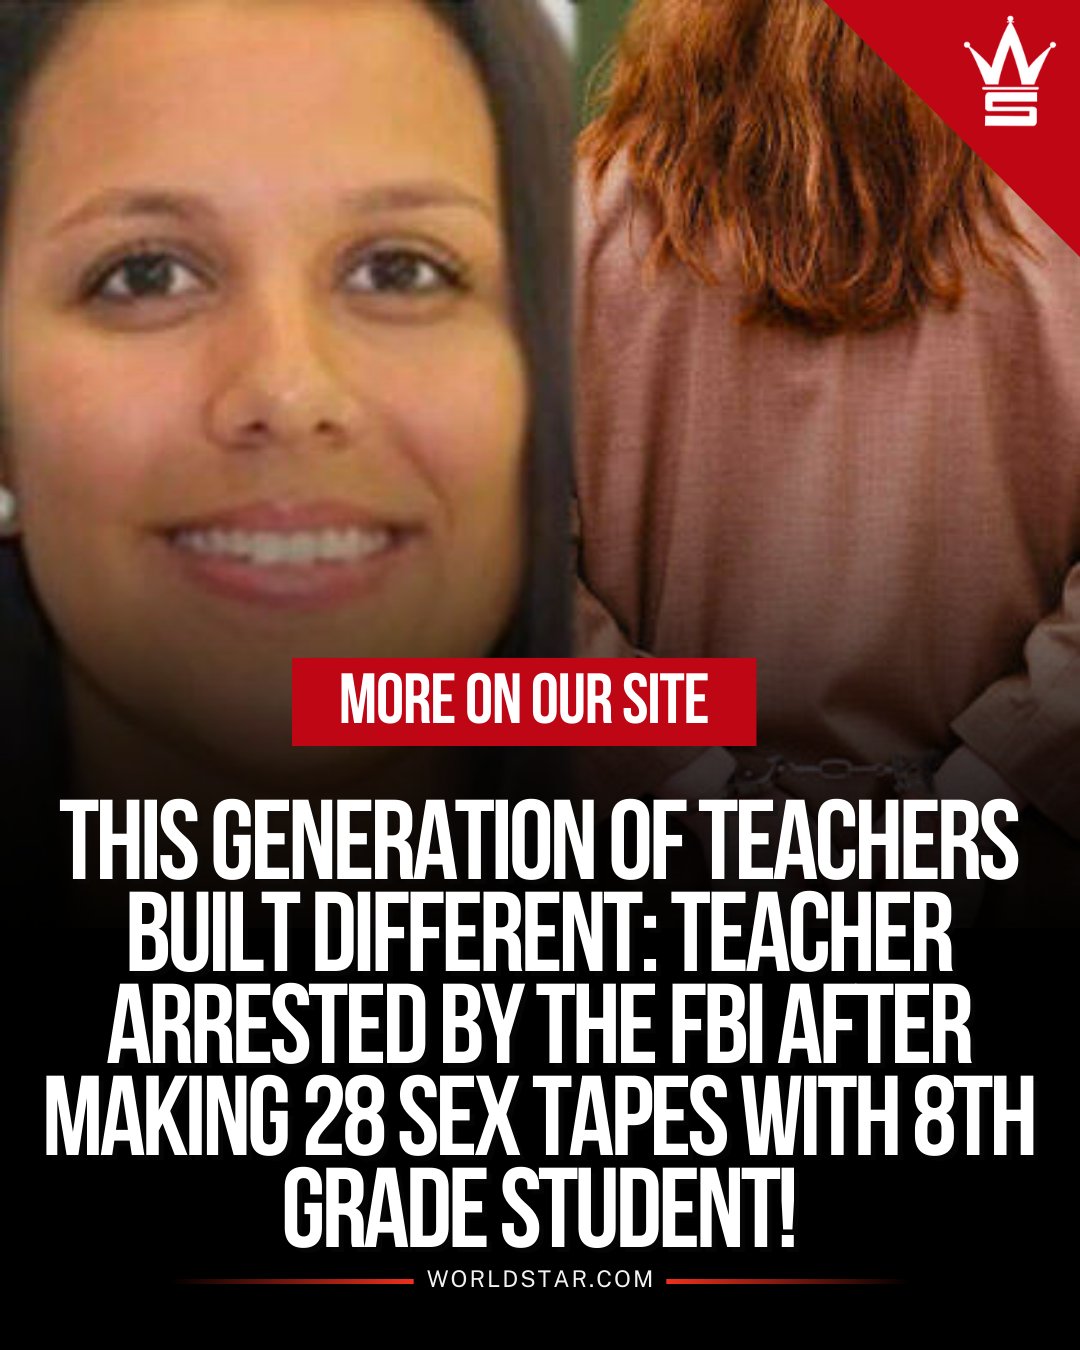 WORLDSTARHIPHOP on X: This Generation Of Teachers Built Different: Teacher  Arrested By The FBl After Making 28 Sex Tapes With 8th Grade Student!  t.com7jUYUBm3x t.cowor7JFkY0E  X